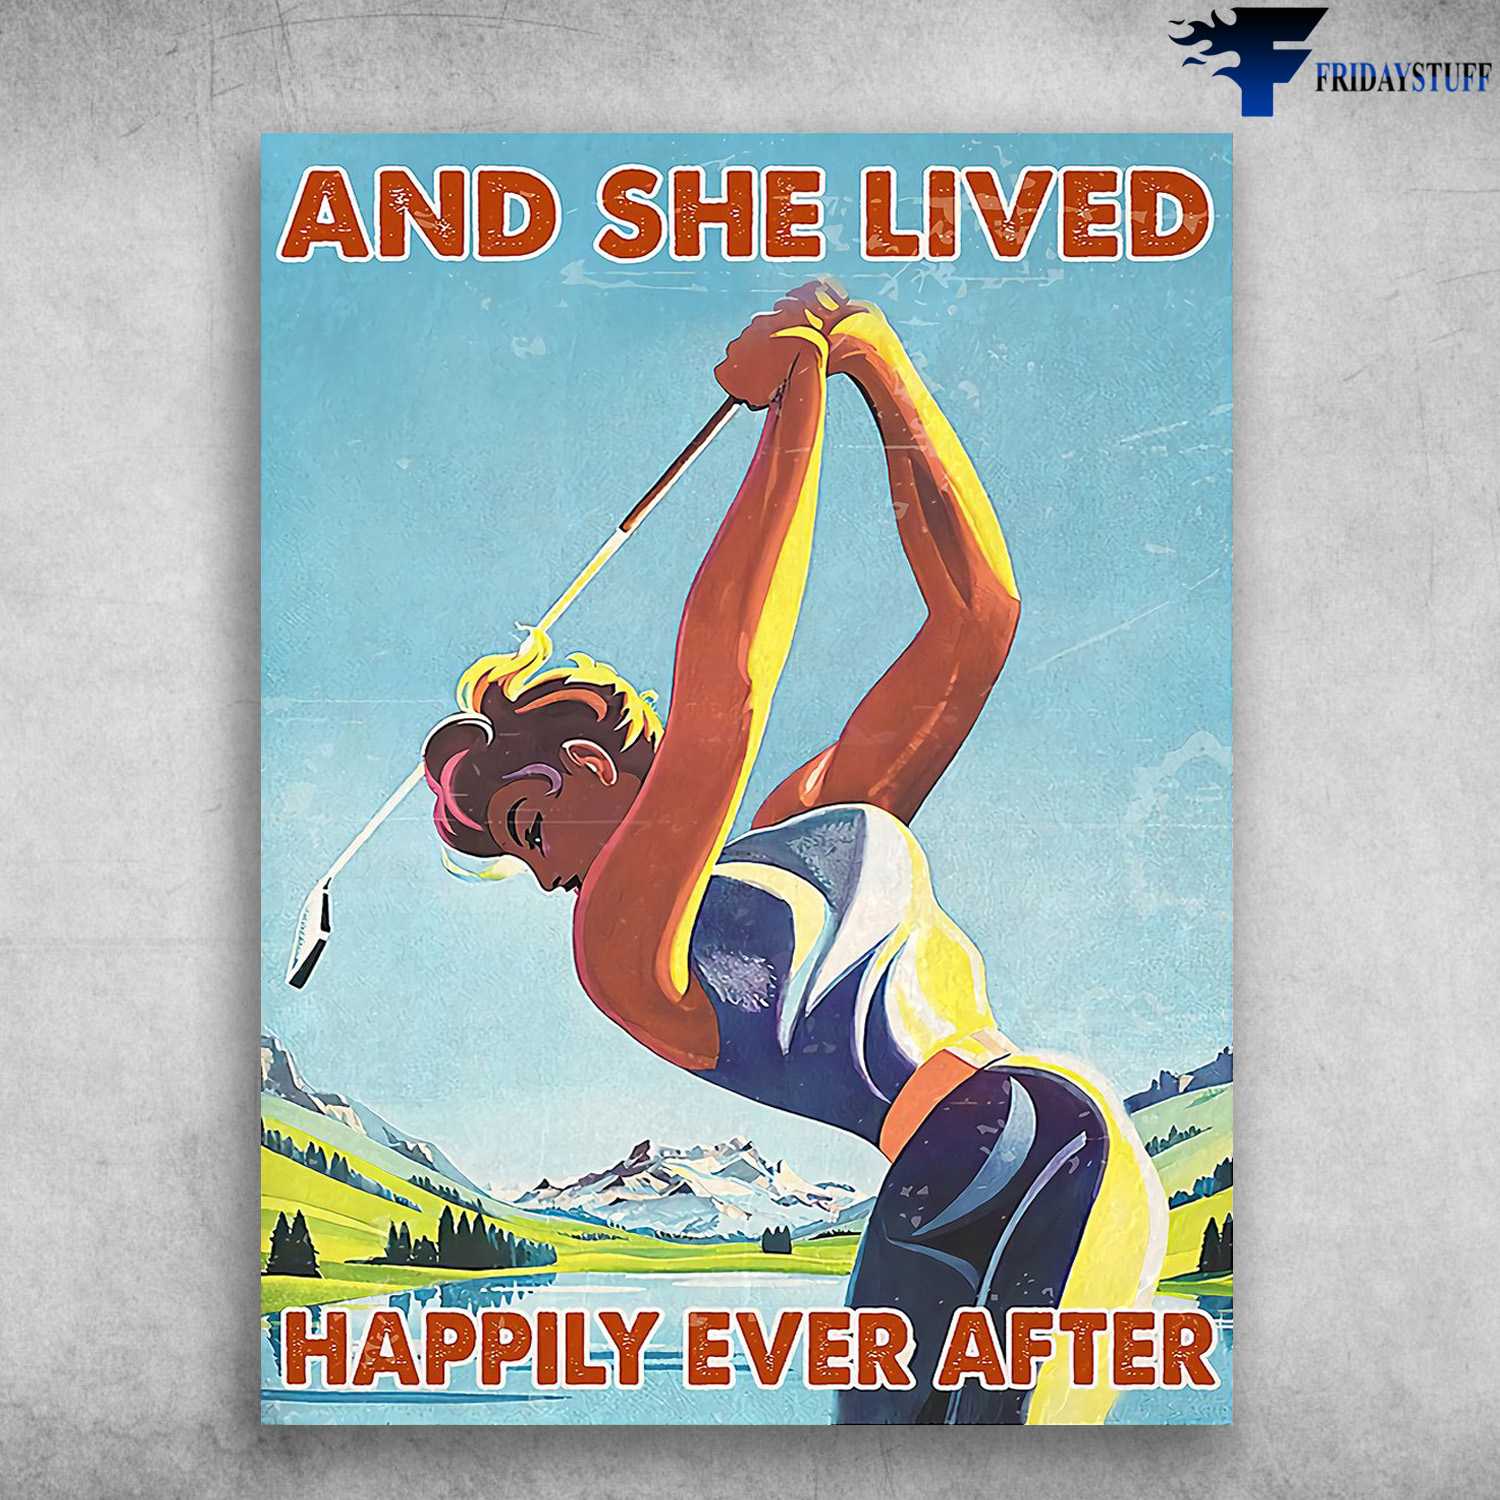 Lady Plays Golf, Golf Poster - And She Lived, Happily Ever After